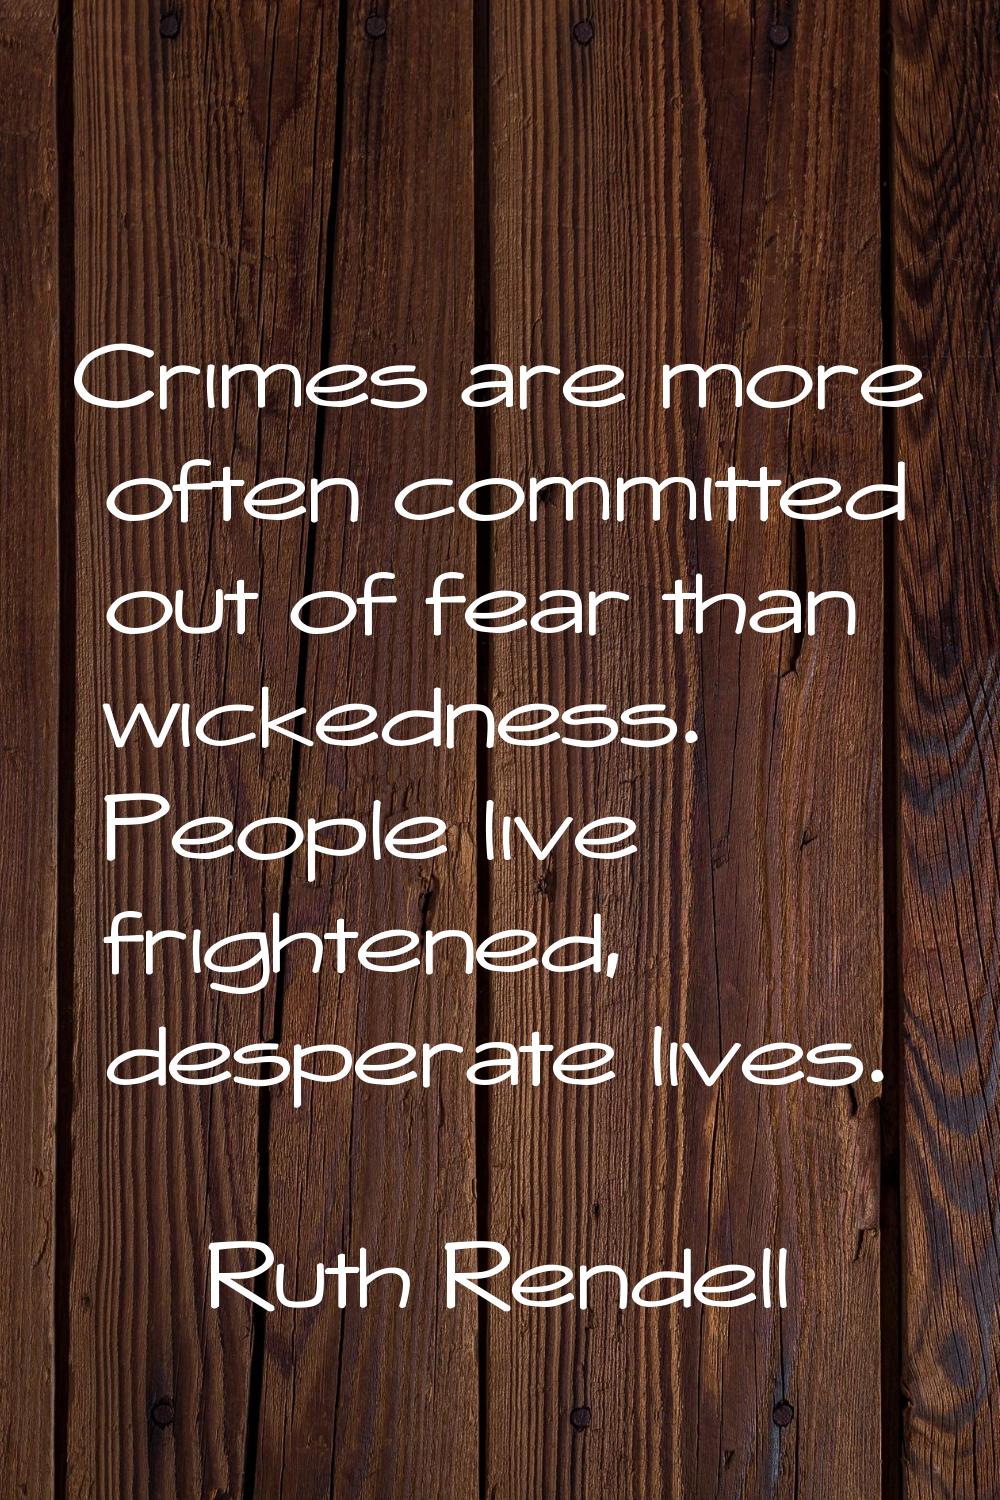 Crimes are more often committed out of fear than wickedness. People live frightened, desperate live